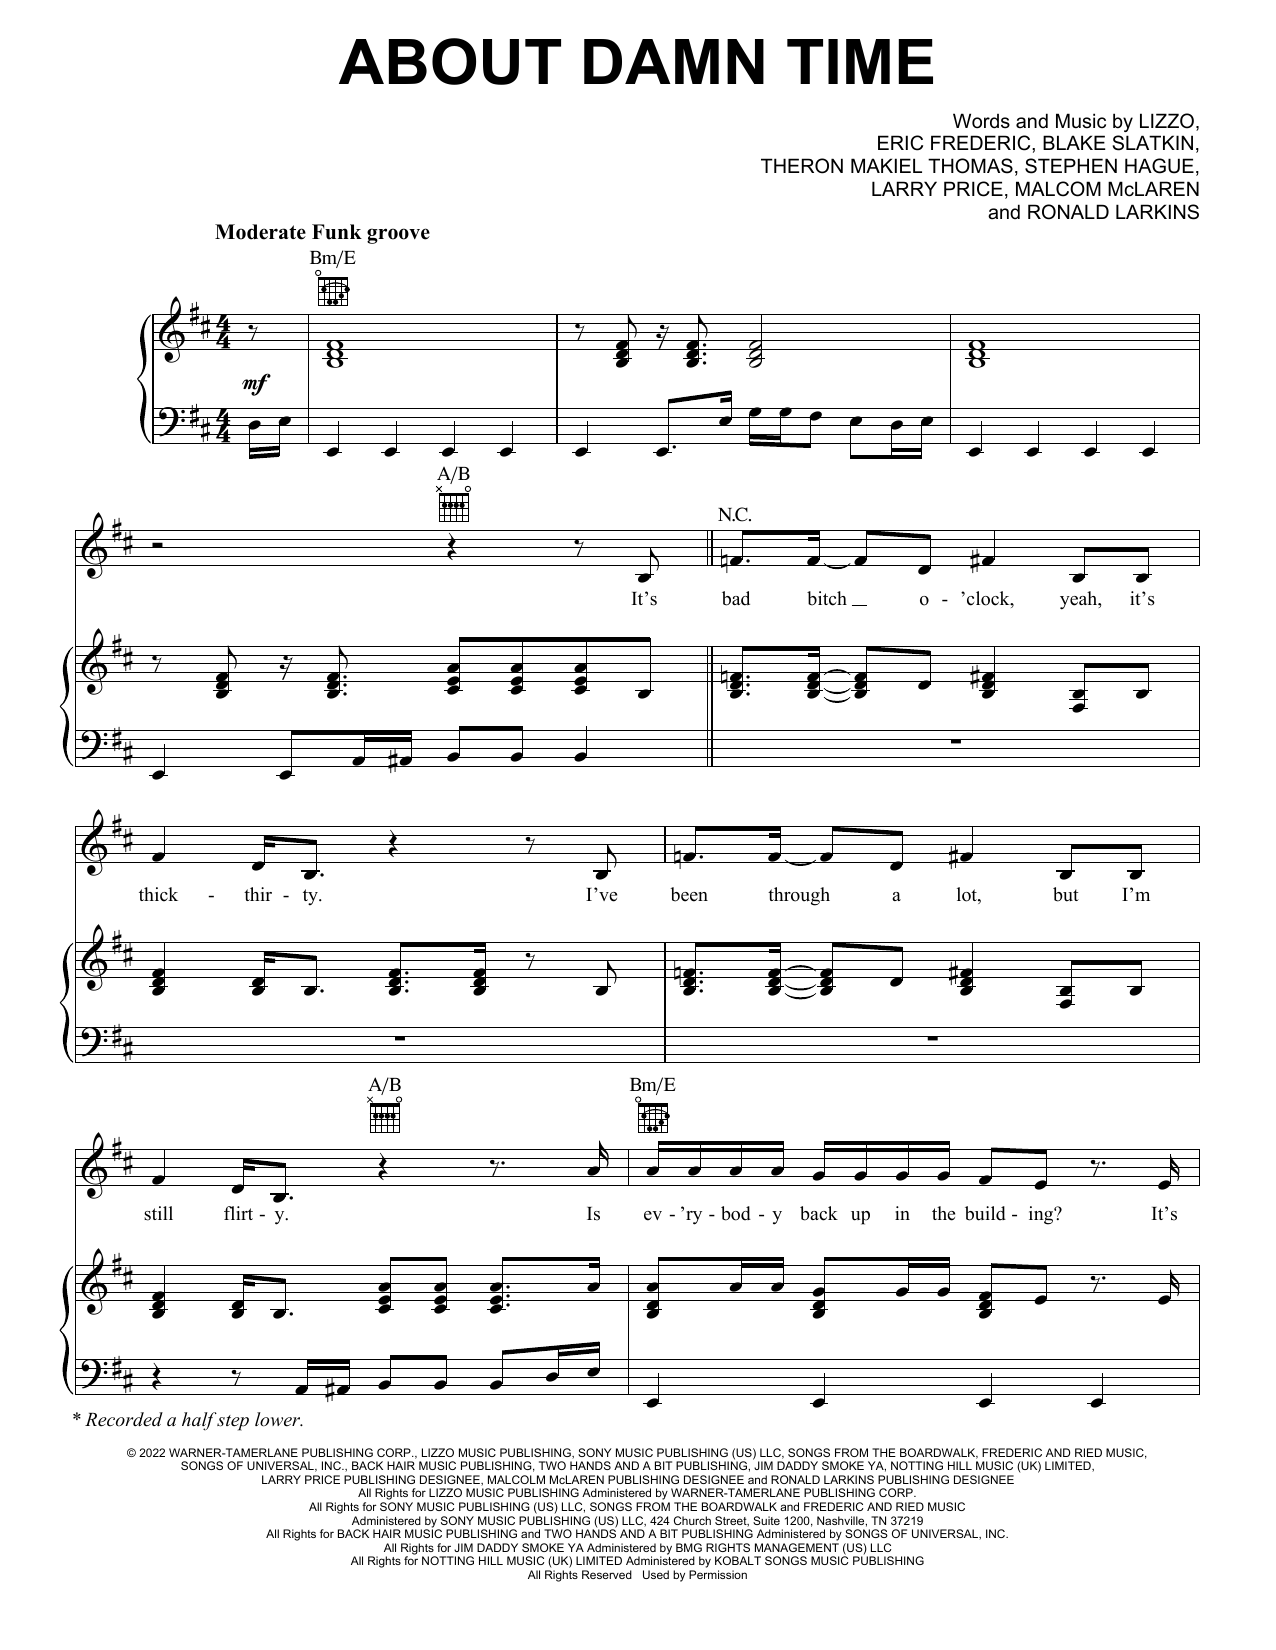 Lizzo About Damn Time sheet music notes and chords. Download Printable PDF.